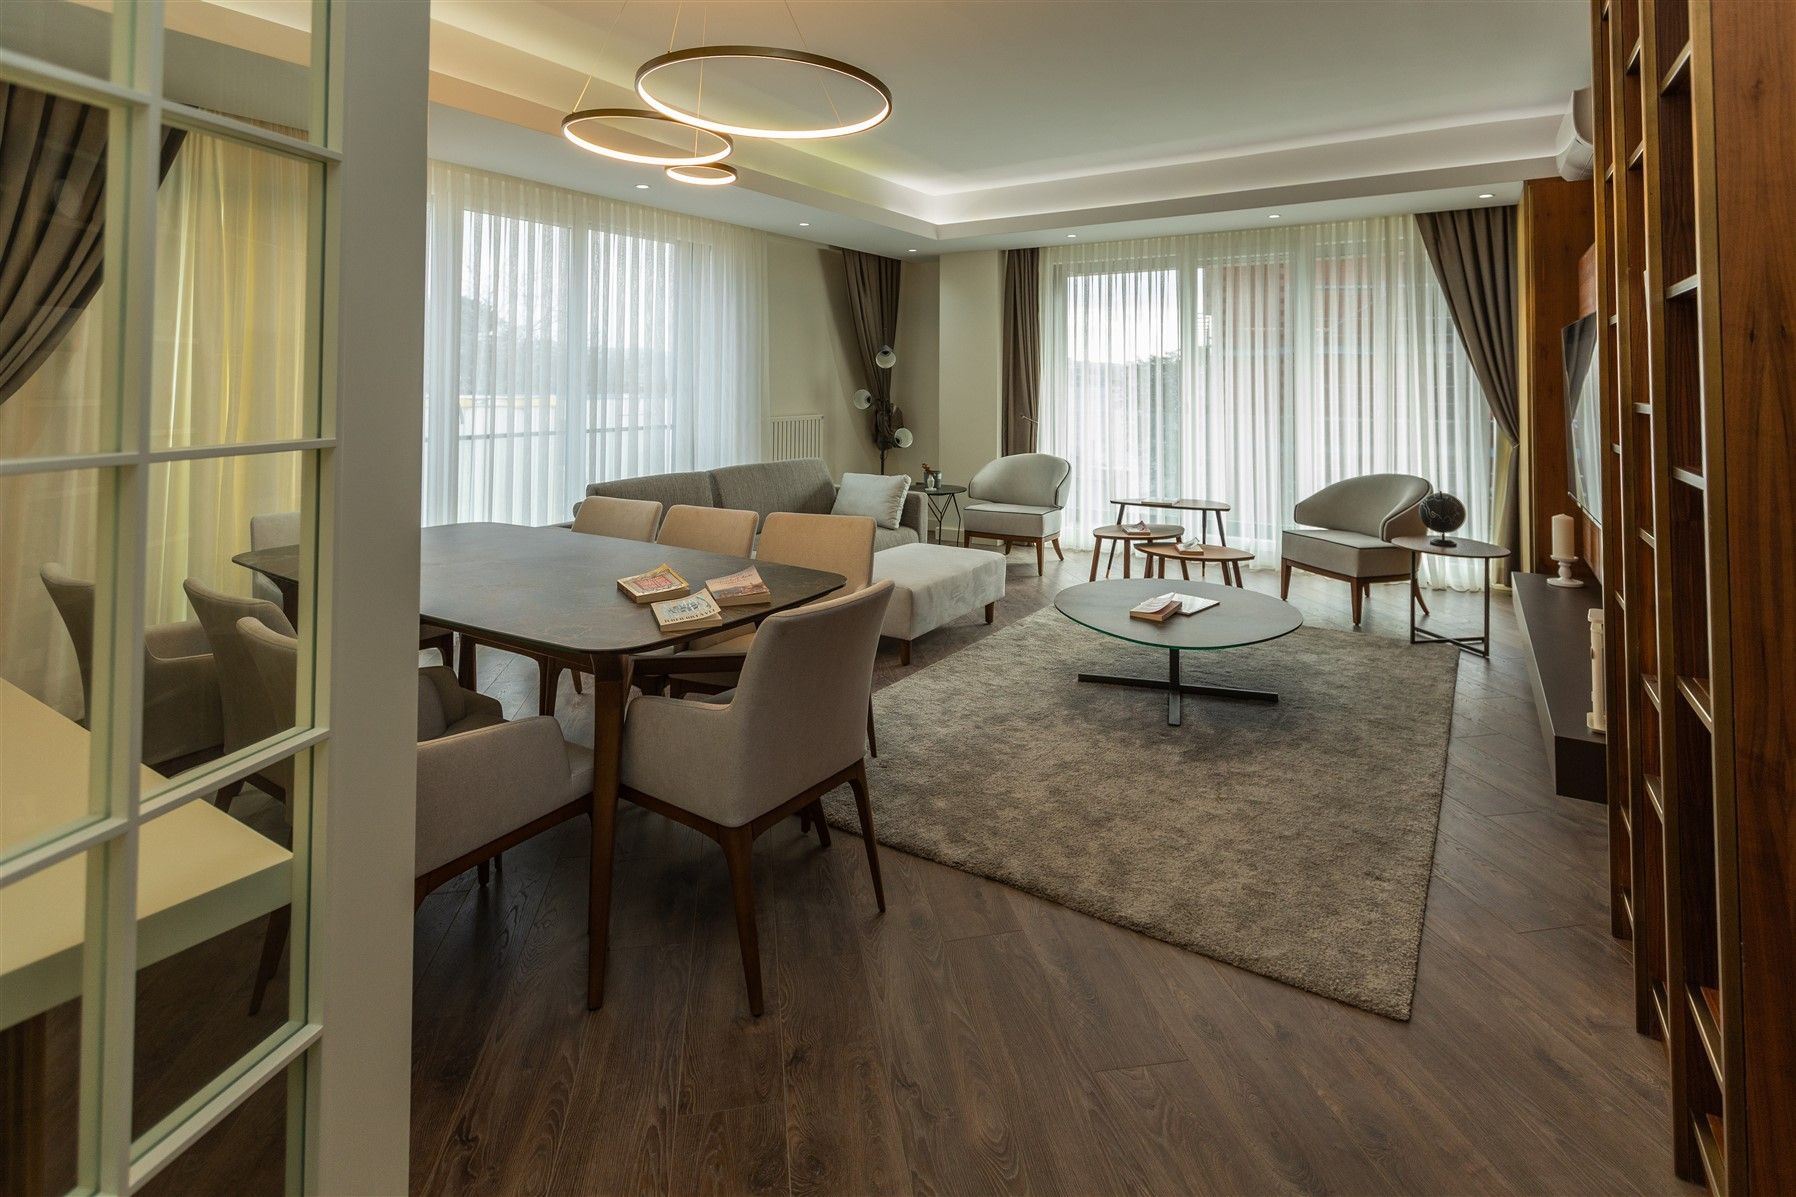 New apartments a few meters from the coast of the Marmara Sea